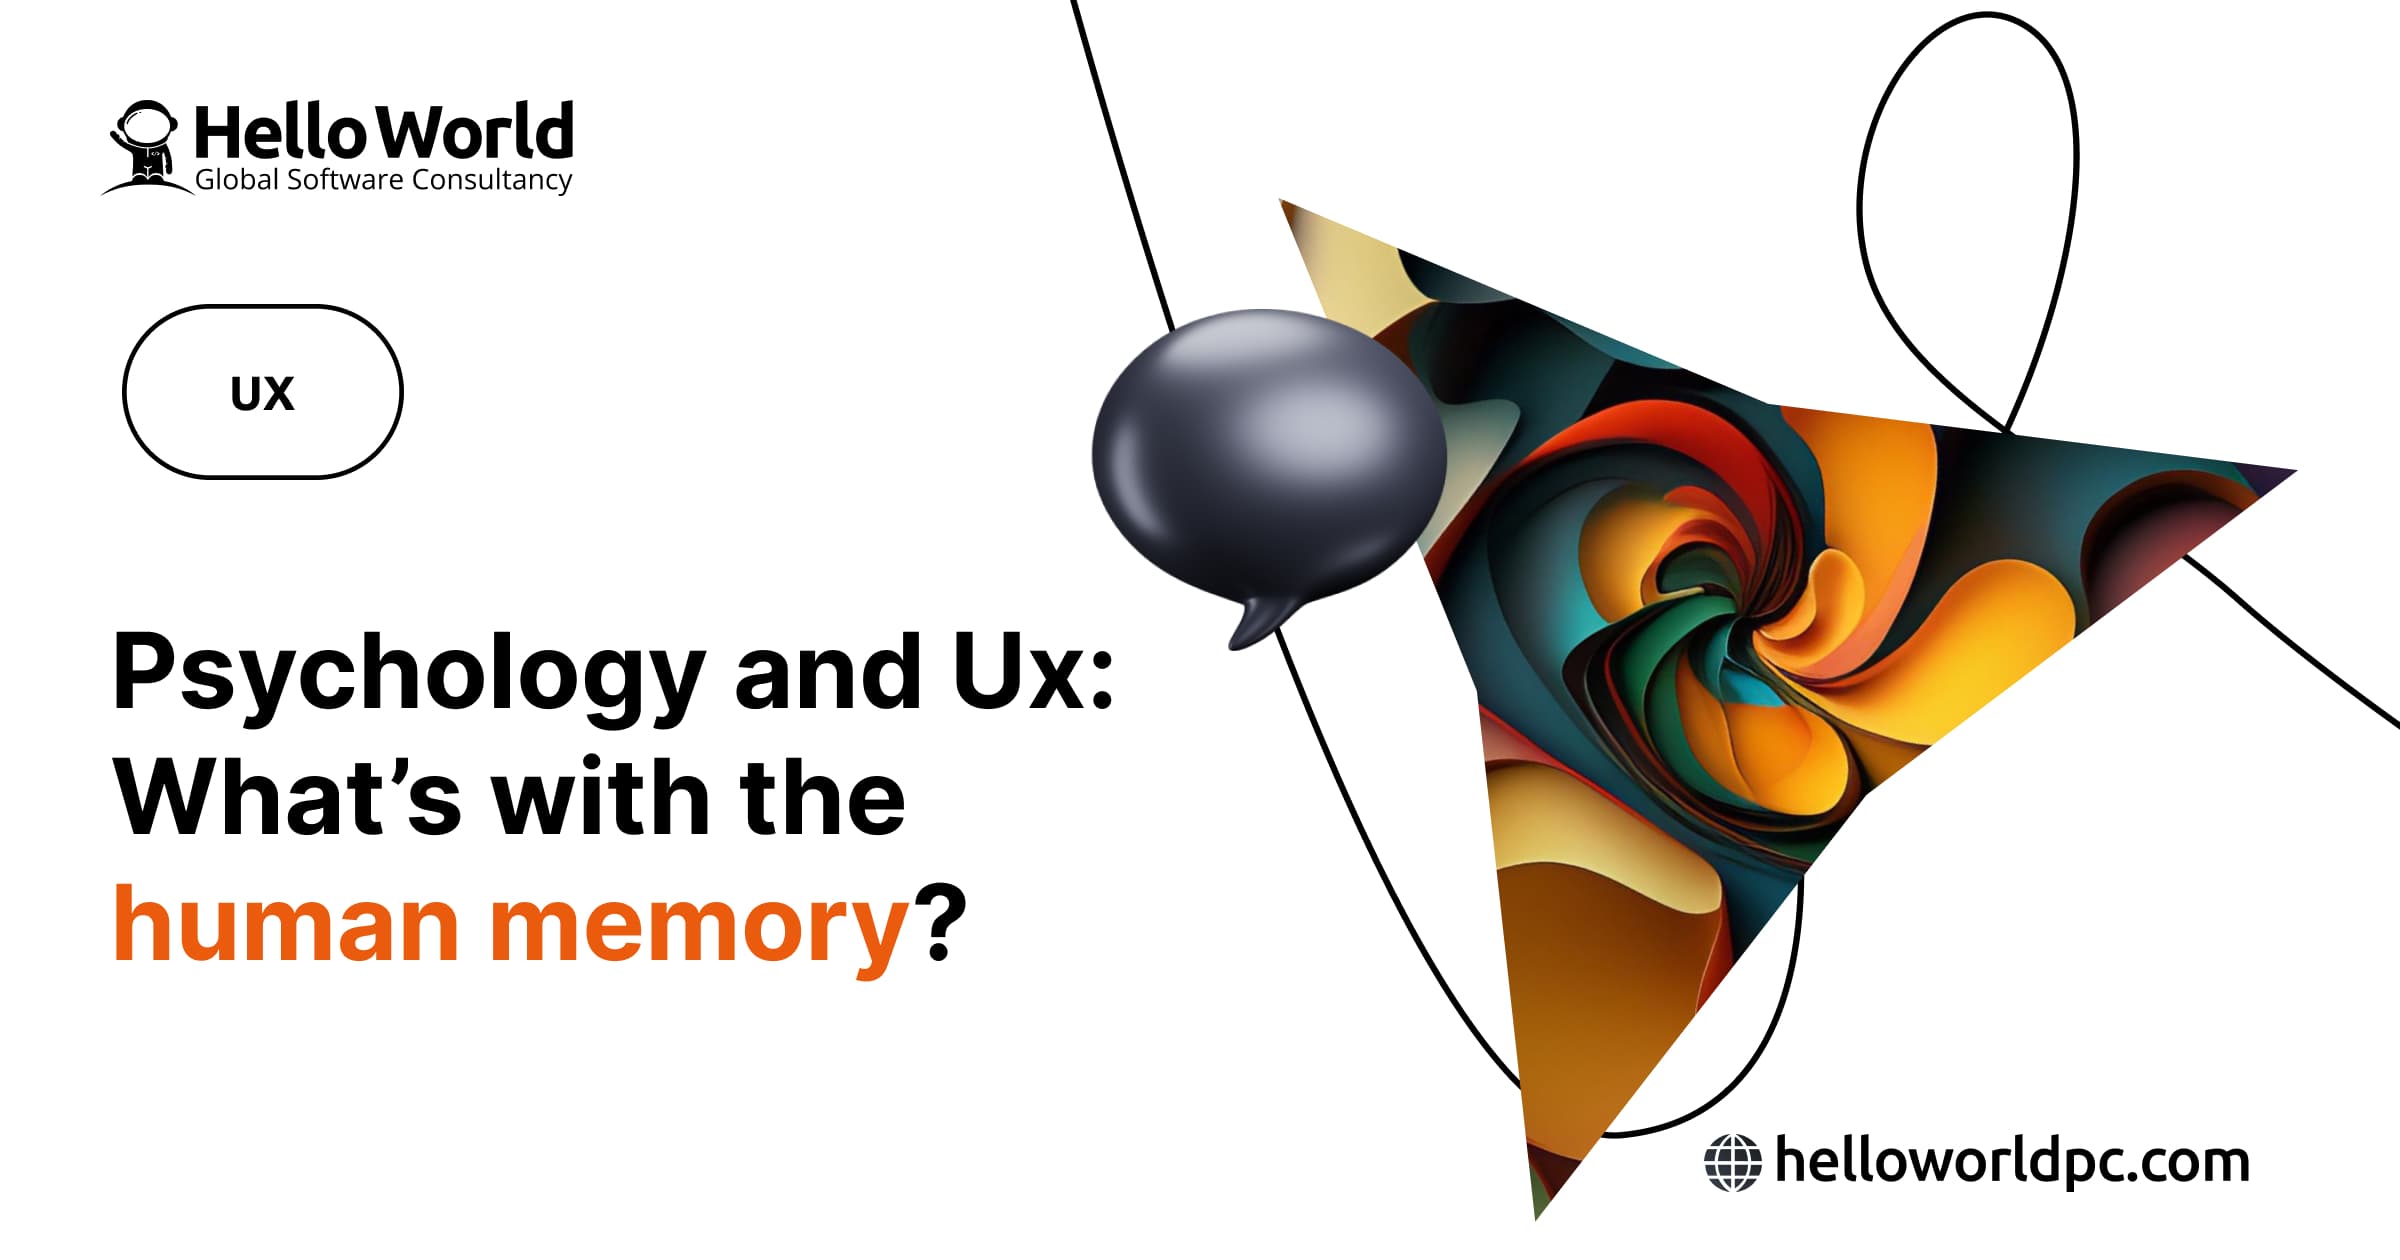 Psychology and UX: What’s with the human memory?